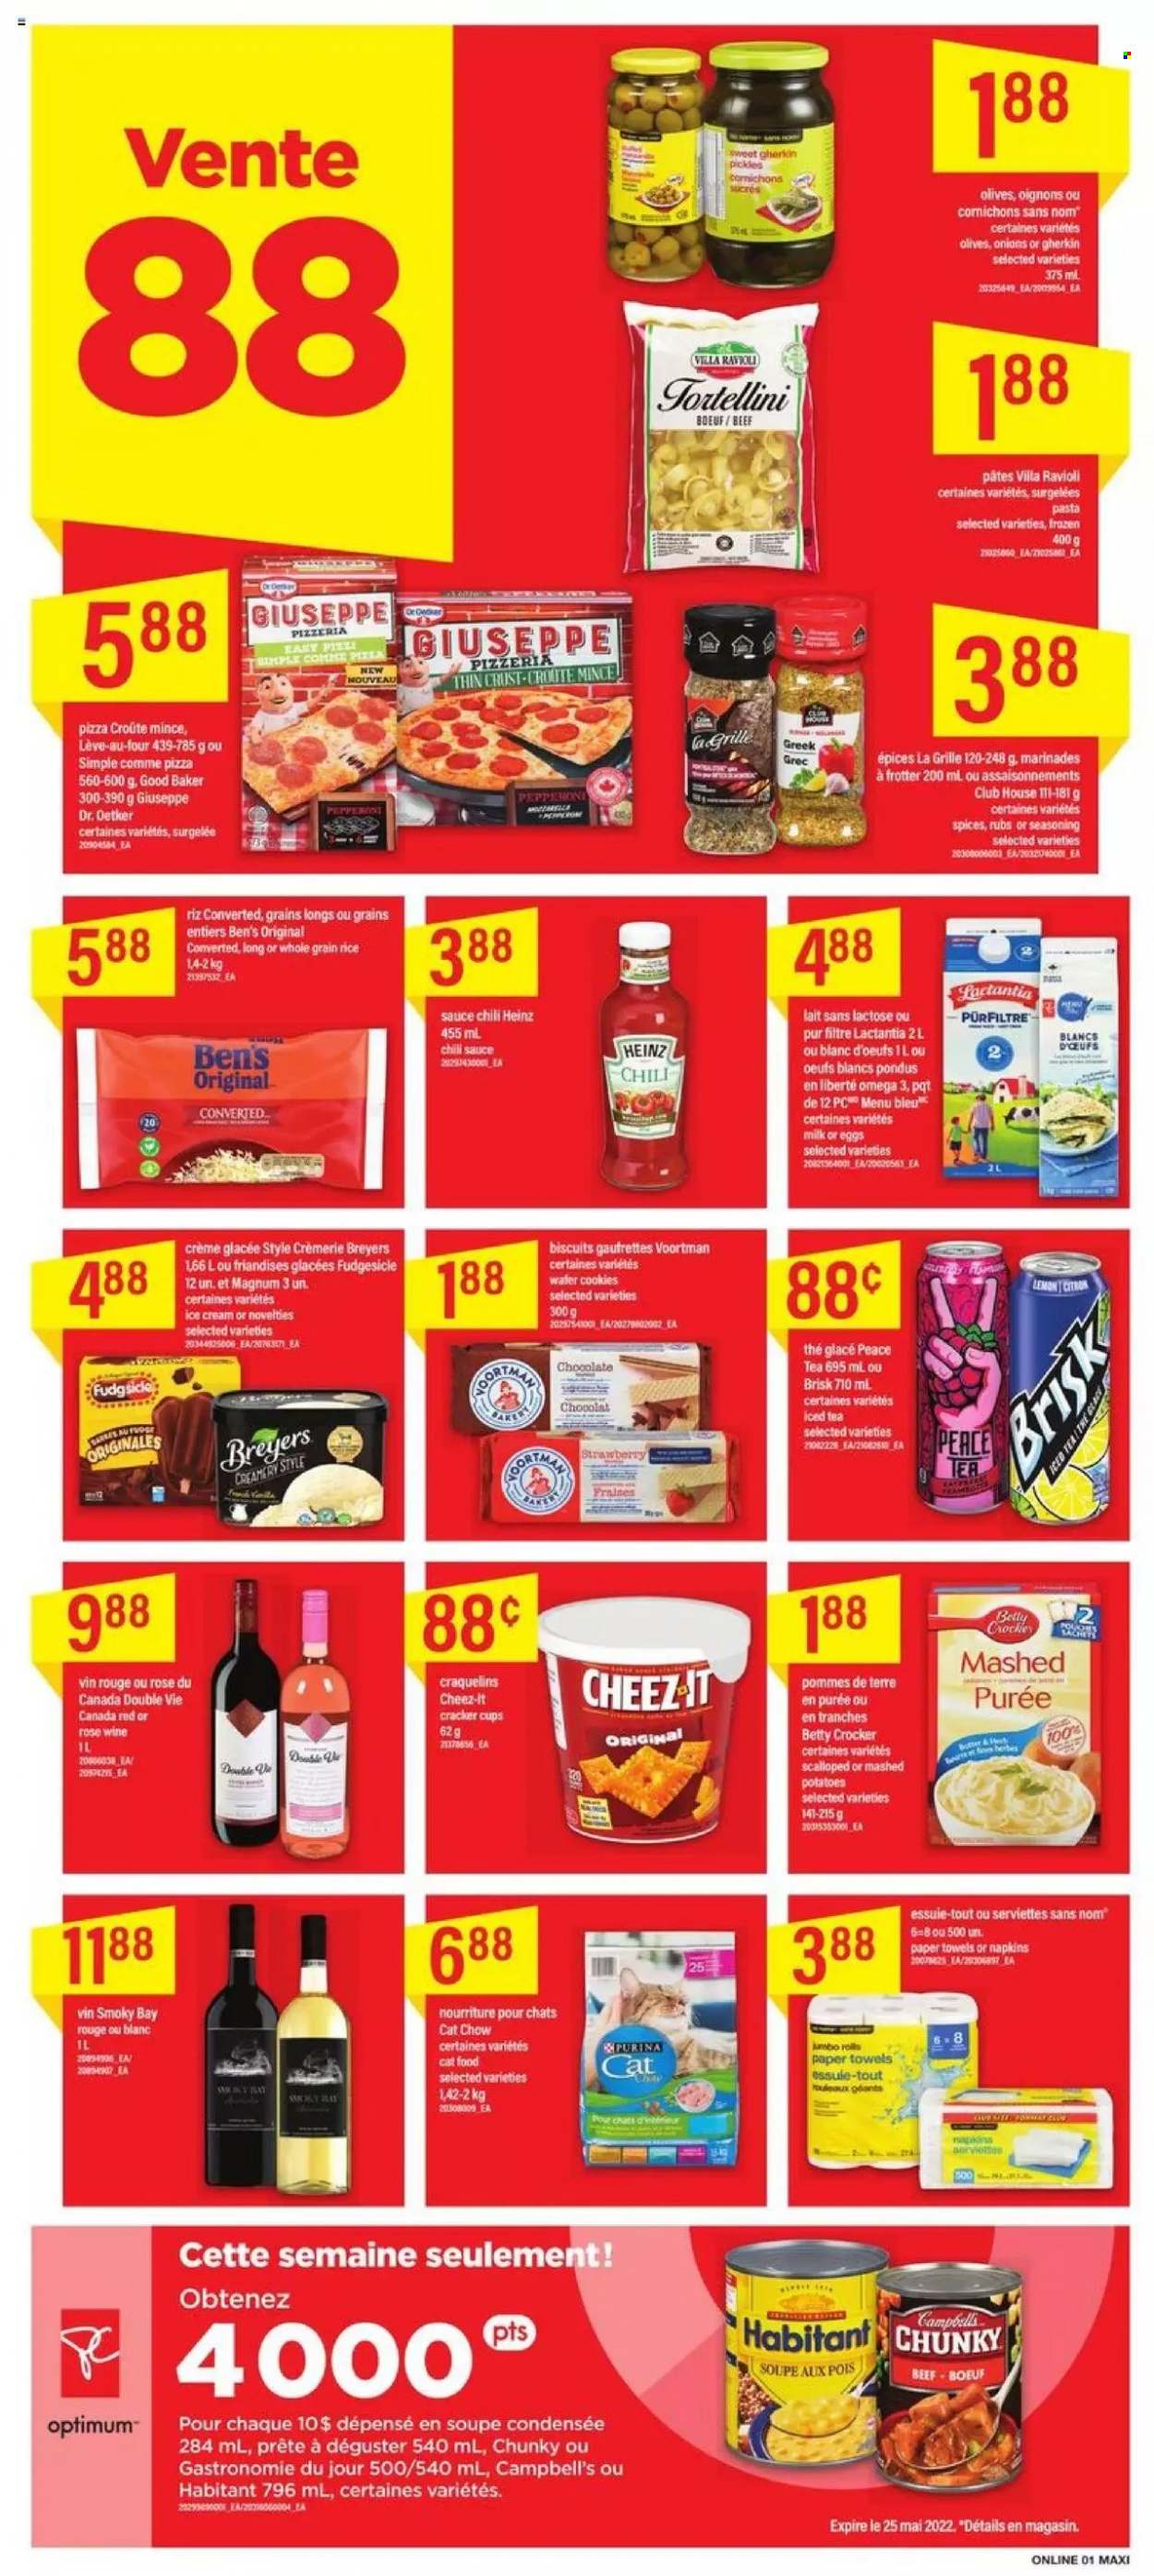 thumbnail - Maxi Flyer - May 19, 2022 - May 25, 2022 - Sales products - onion, Campbell's, mashed potatoes, ravioli, pizza, pasta, sauce, tortellini, pepperoni, Dr. Oetker, milk, eggs, Magnum, ice cream, cookies, wafers, crackers, biscuit, Cheez-It, pickles, rice, whole grain rice, spice, chilli sauce, ice tea, rosé wine, napkins, kitchen towels, paper towels, Omega-3, Heinz, olives. Page 6.